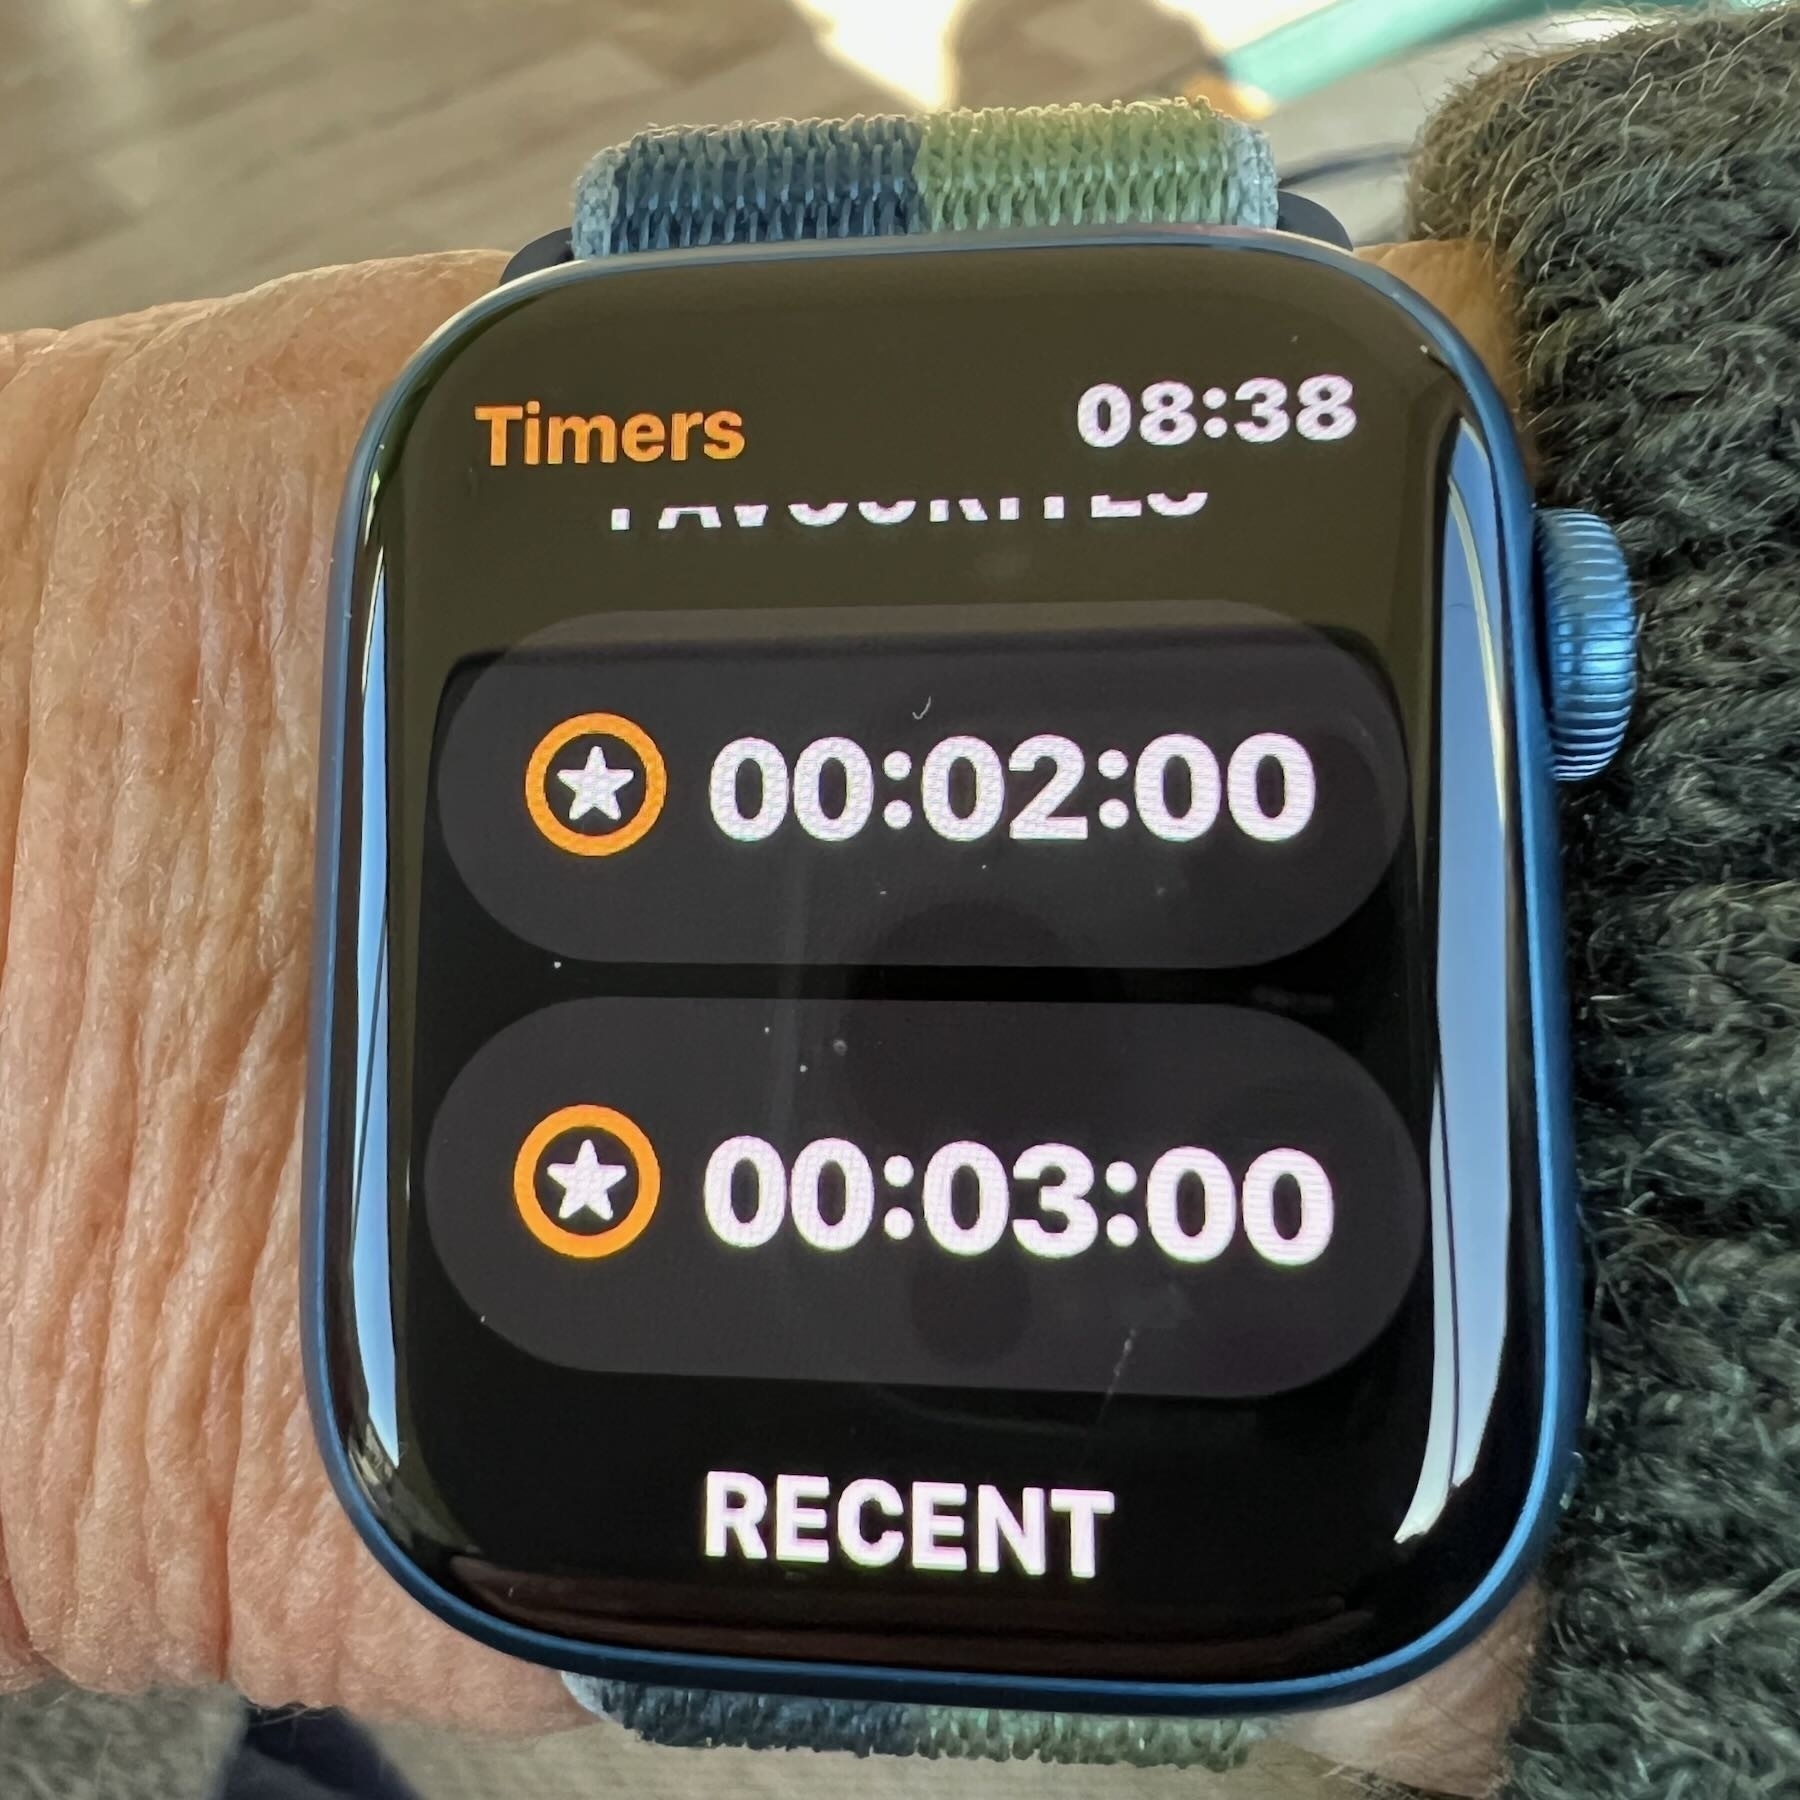 Watch face showing Favourite timers. 